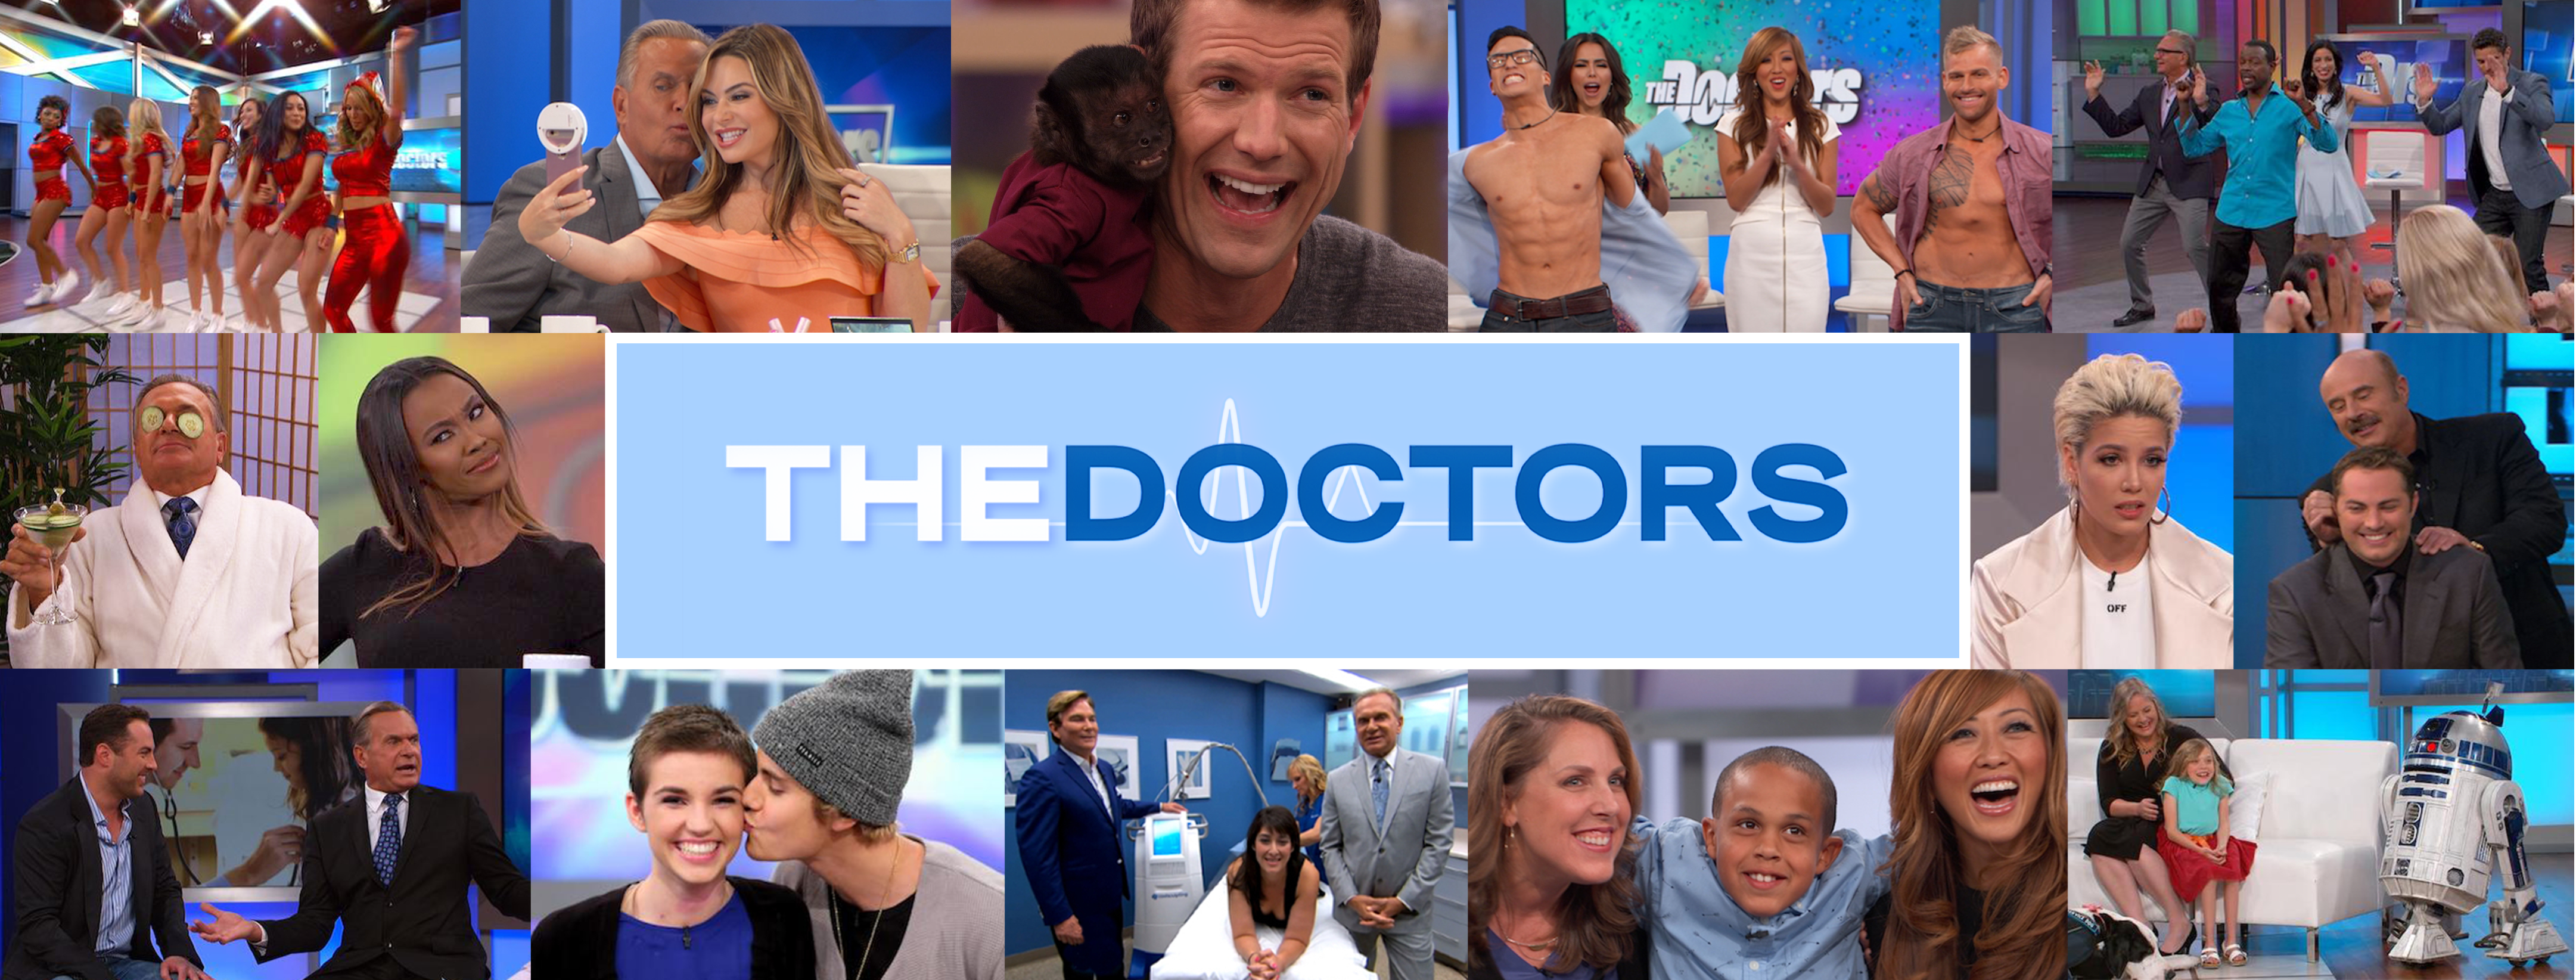 The Doctors on stage with Joanie Demer